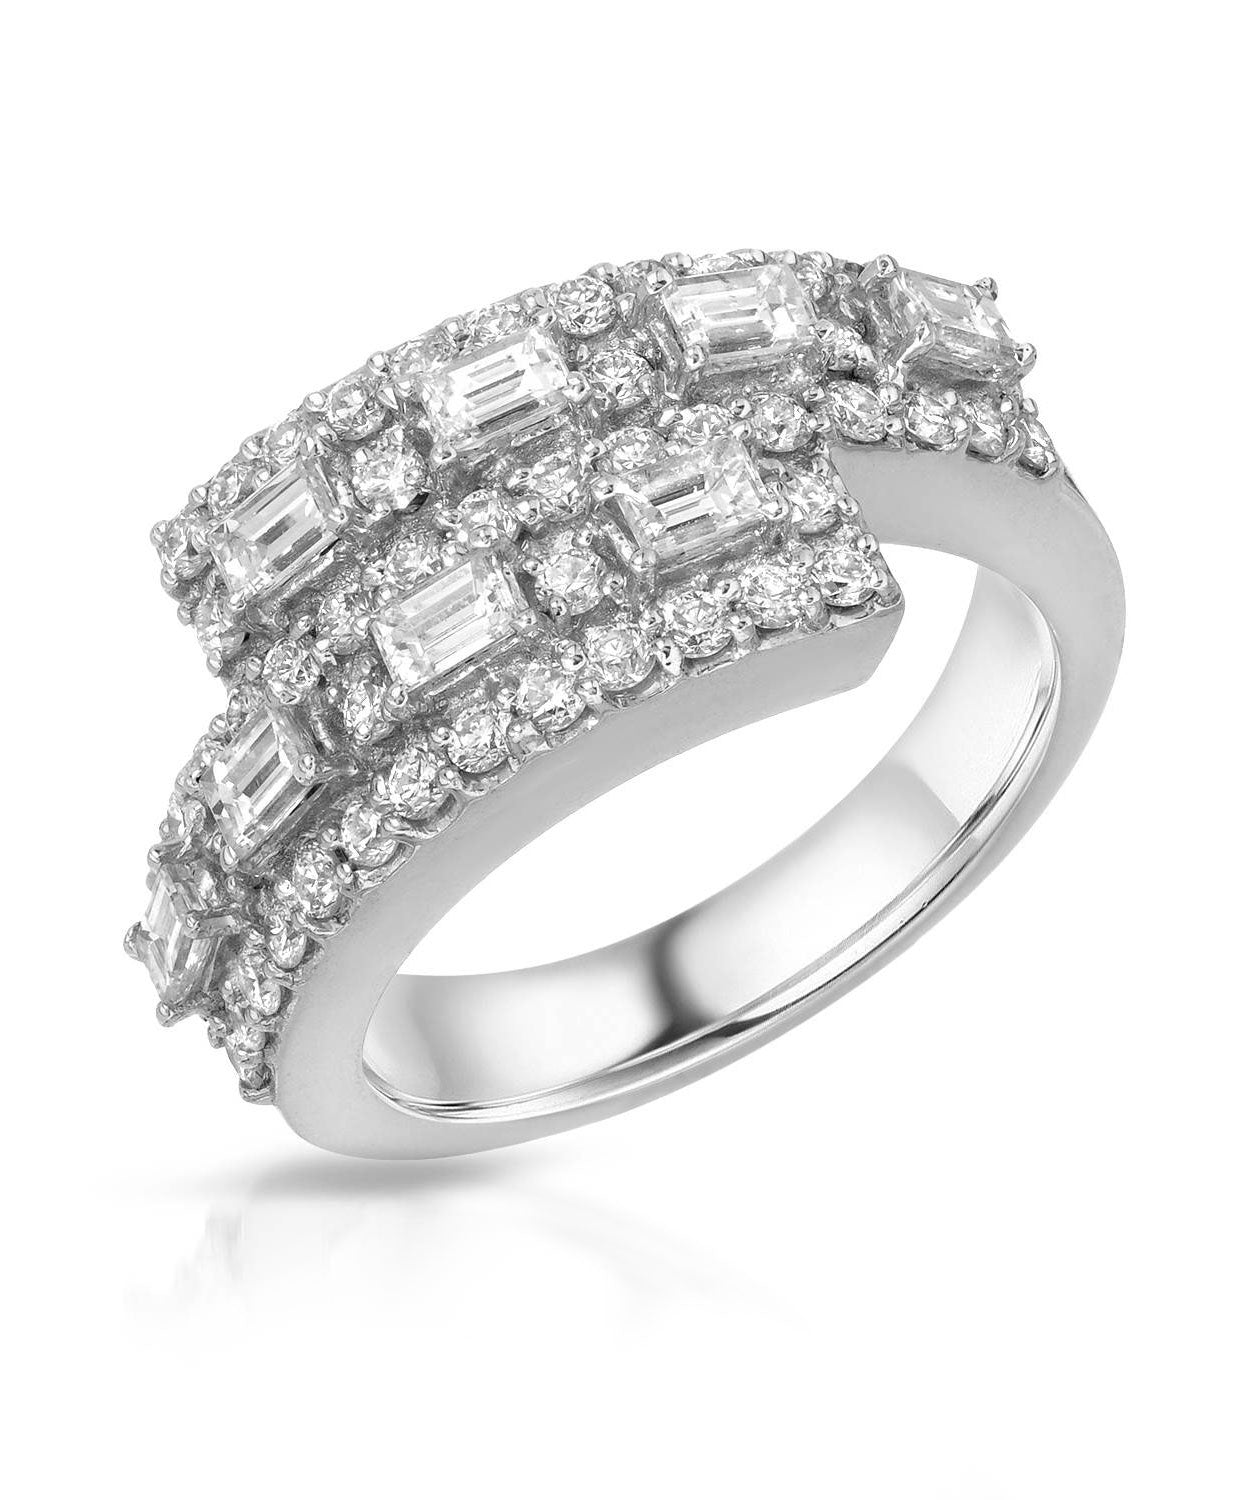 Signature Collection 1.76 ctw Diamond 18k White Gold Right Hand Ring View 1